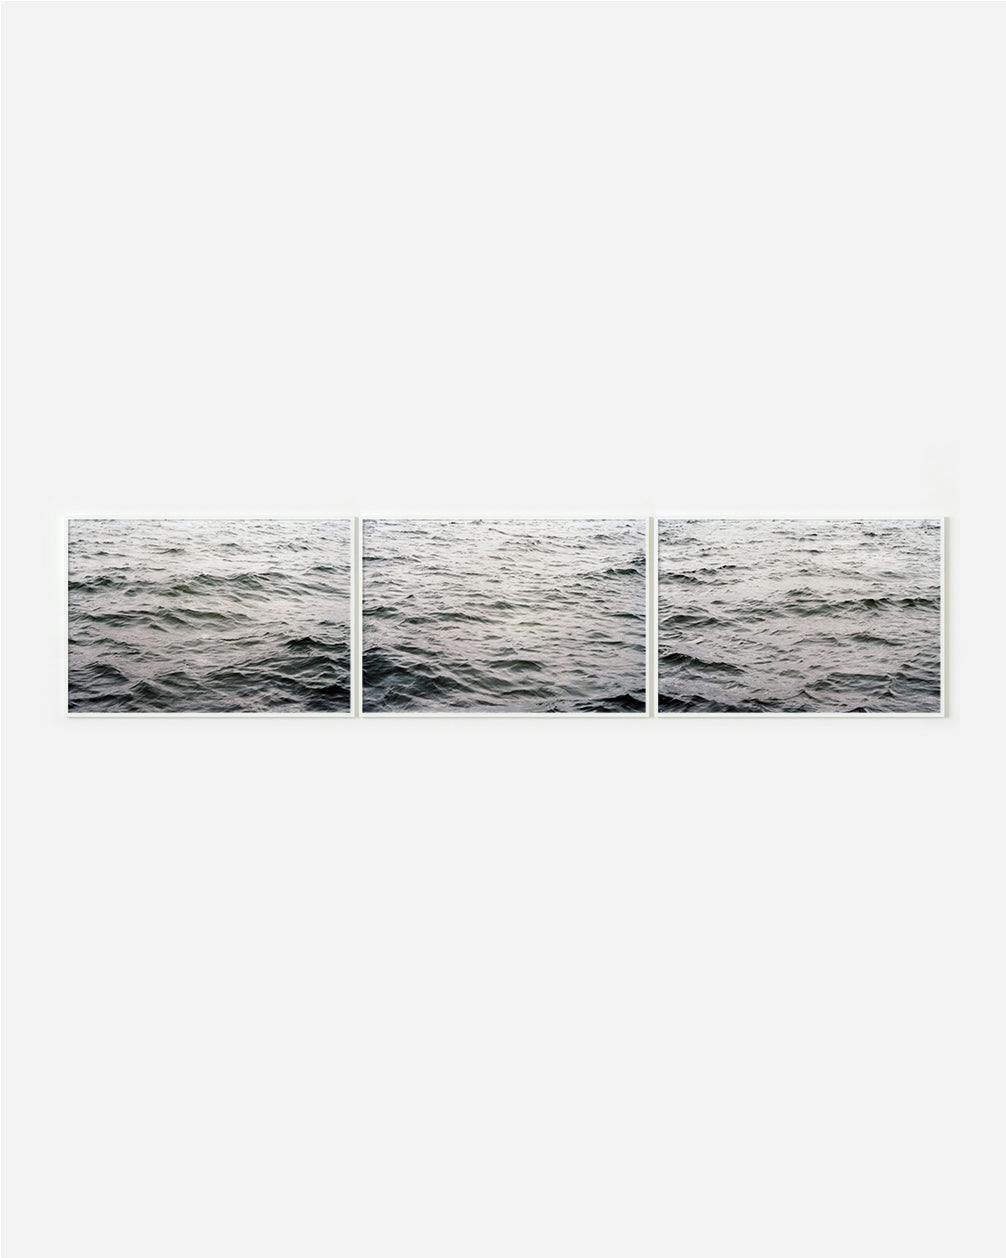 Photography by Ryan James MacFarland titled "Bay Triptych".